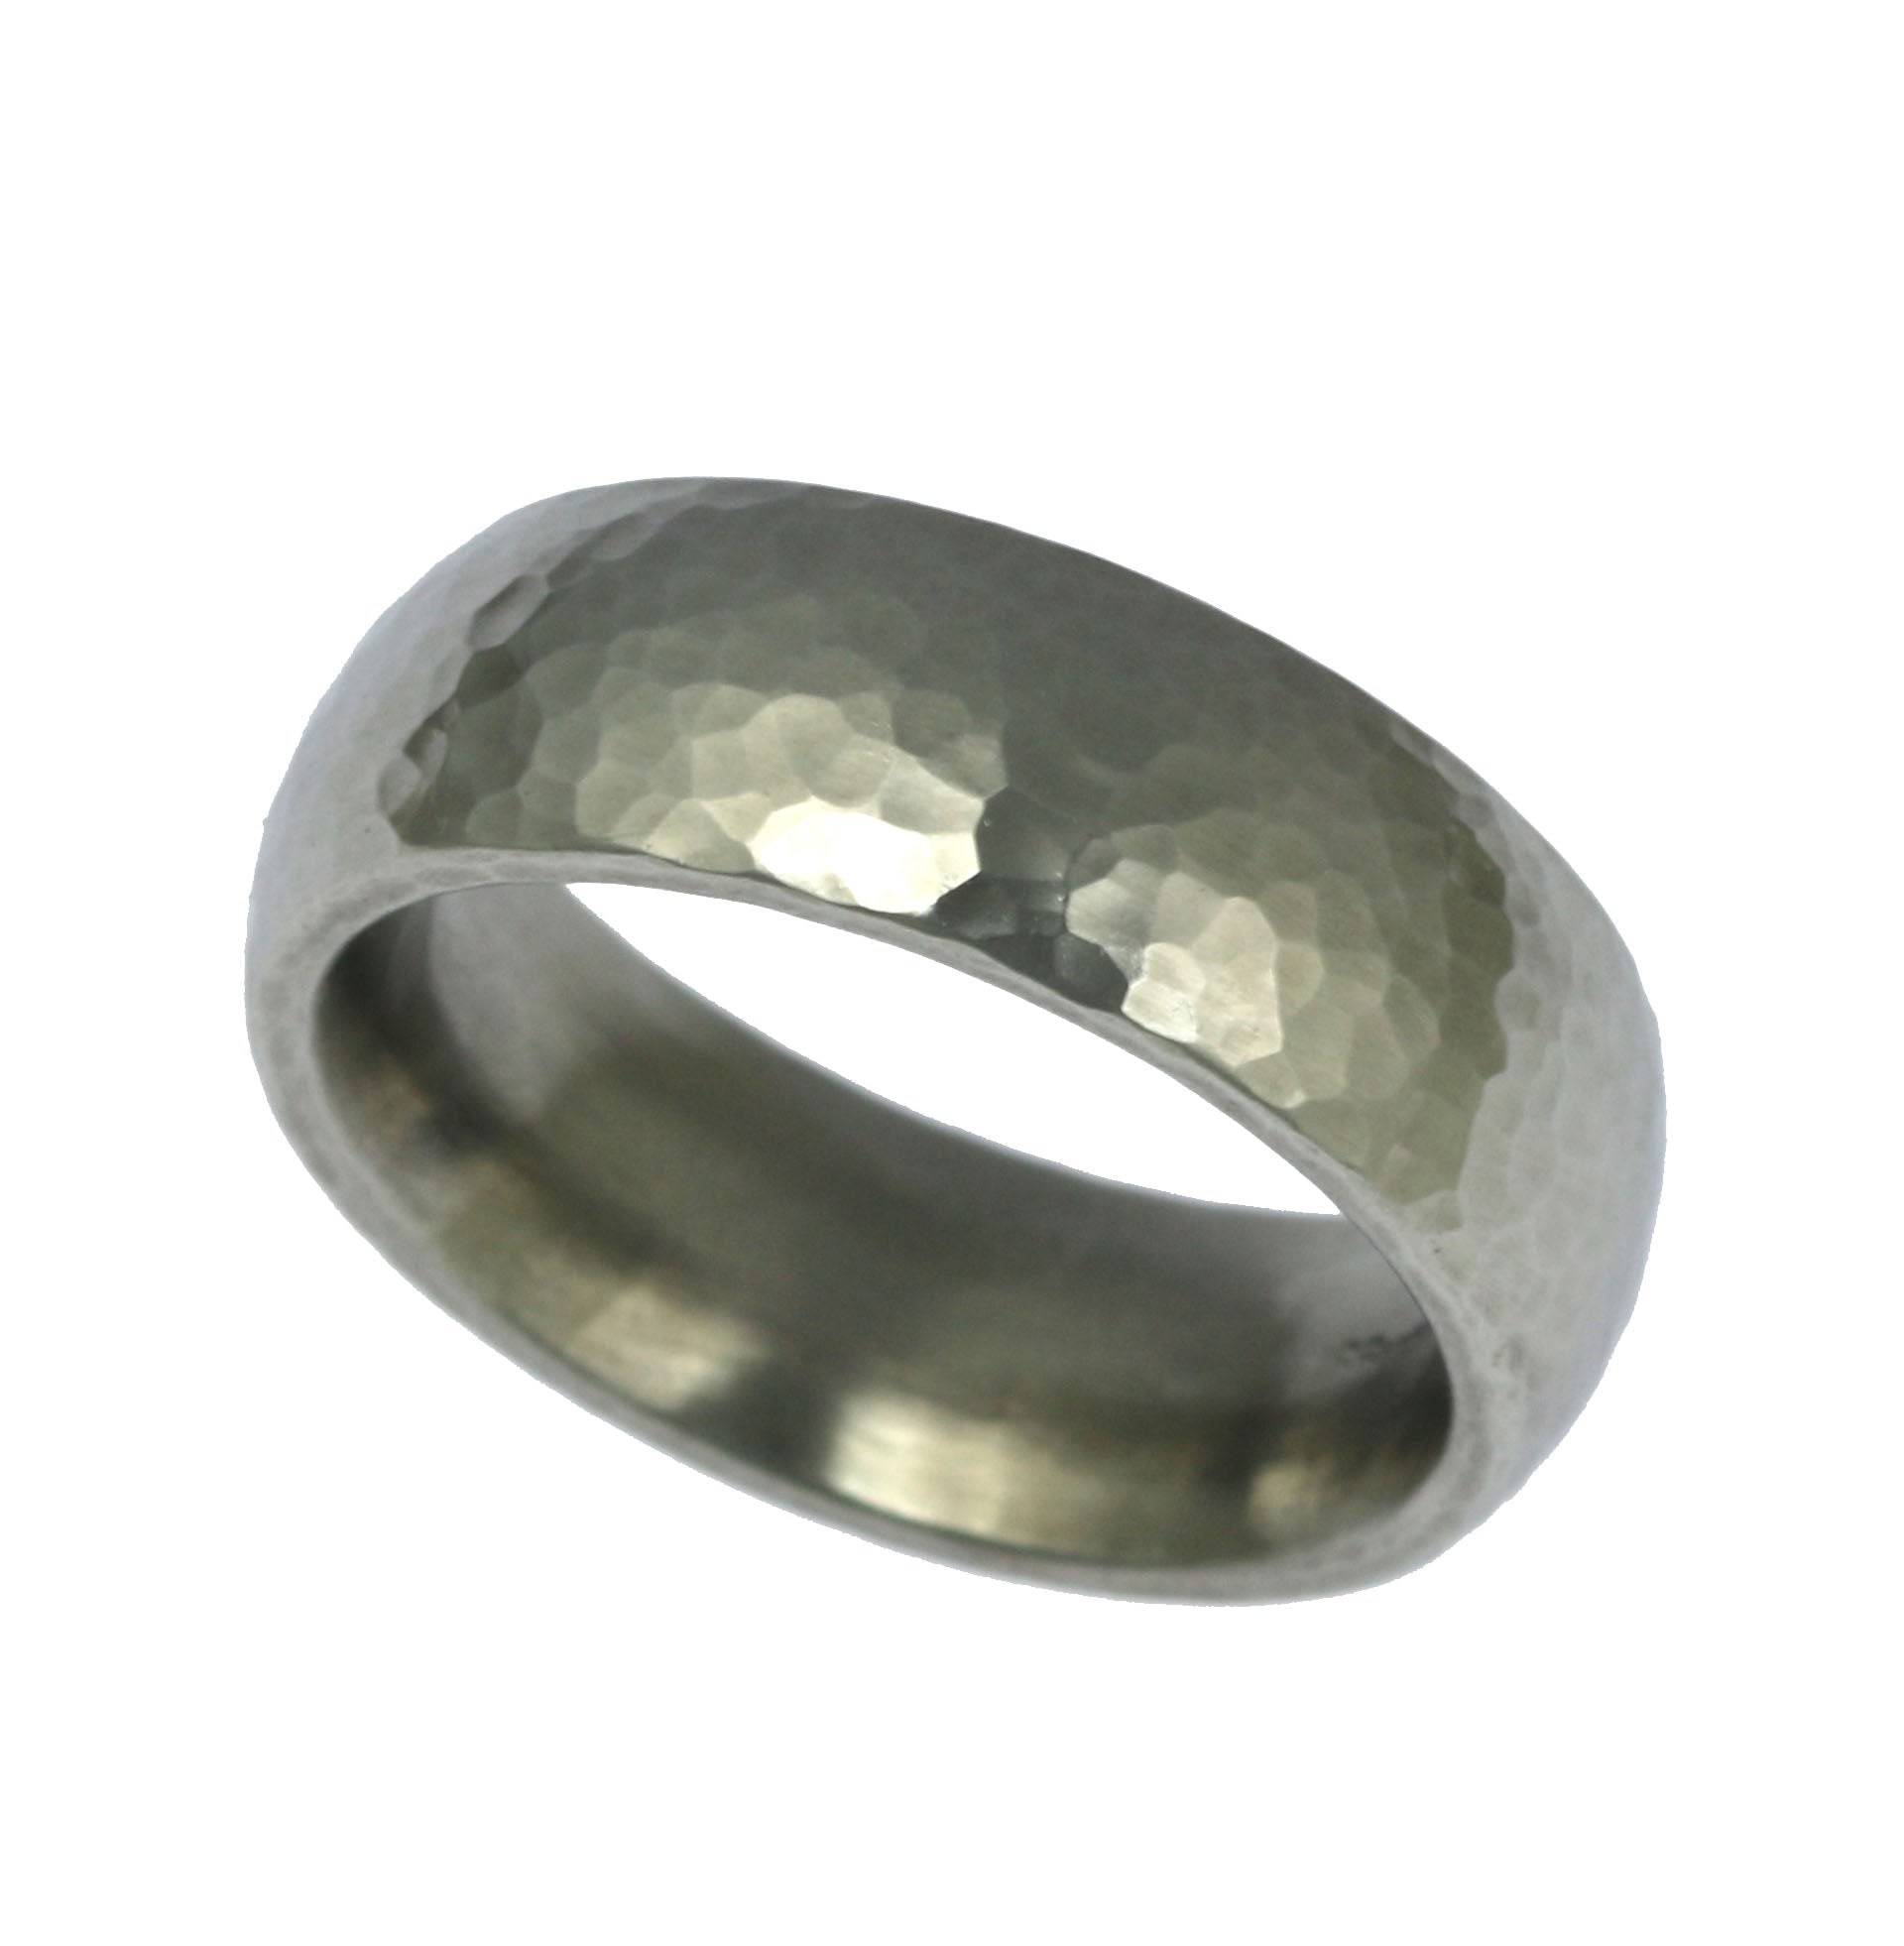 Finish of 8mm Hammered Domed Stainless Steel Men's Ring